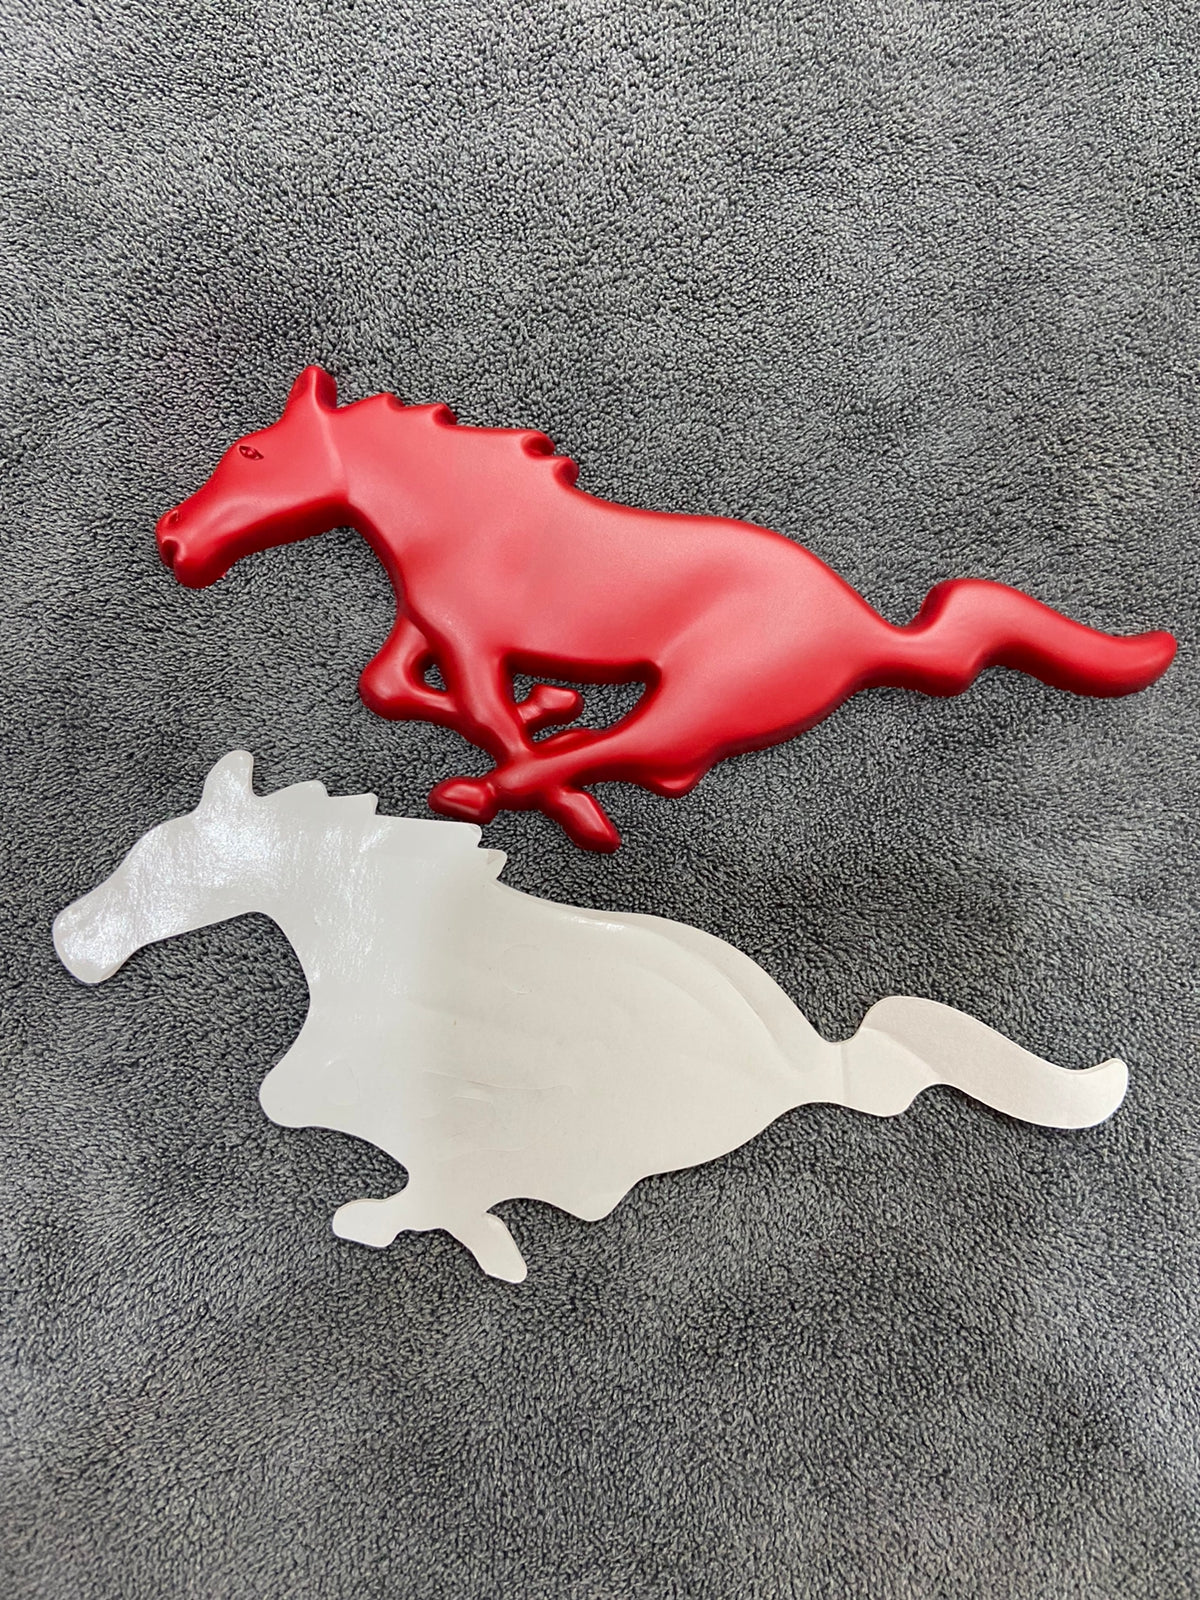 1Pcs Personalized Modified 3D Metal Car Sticker Emblem Badge For Ford Mustang For Red Mustang Logo Car Sticker Accessories